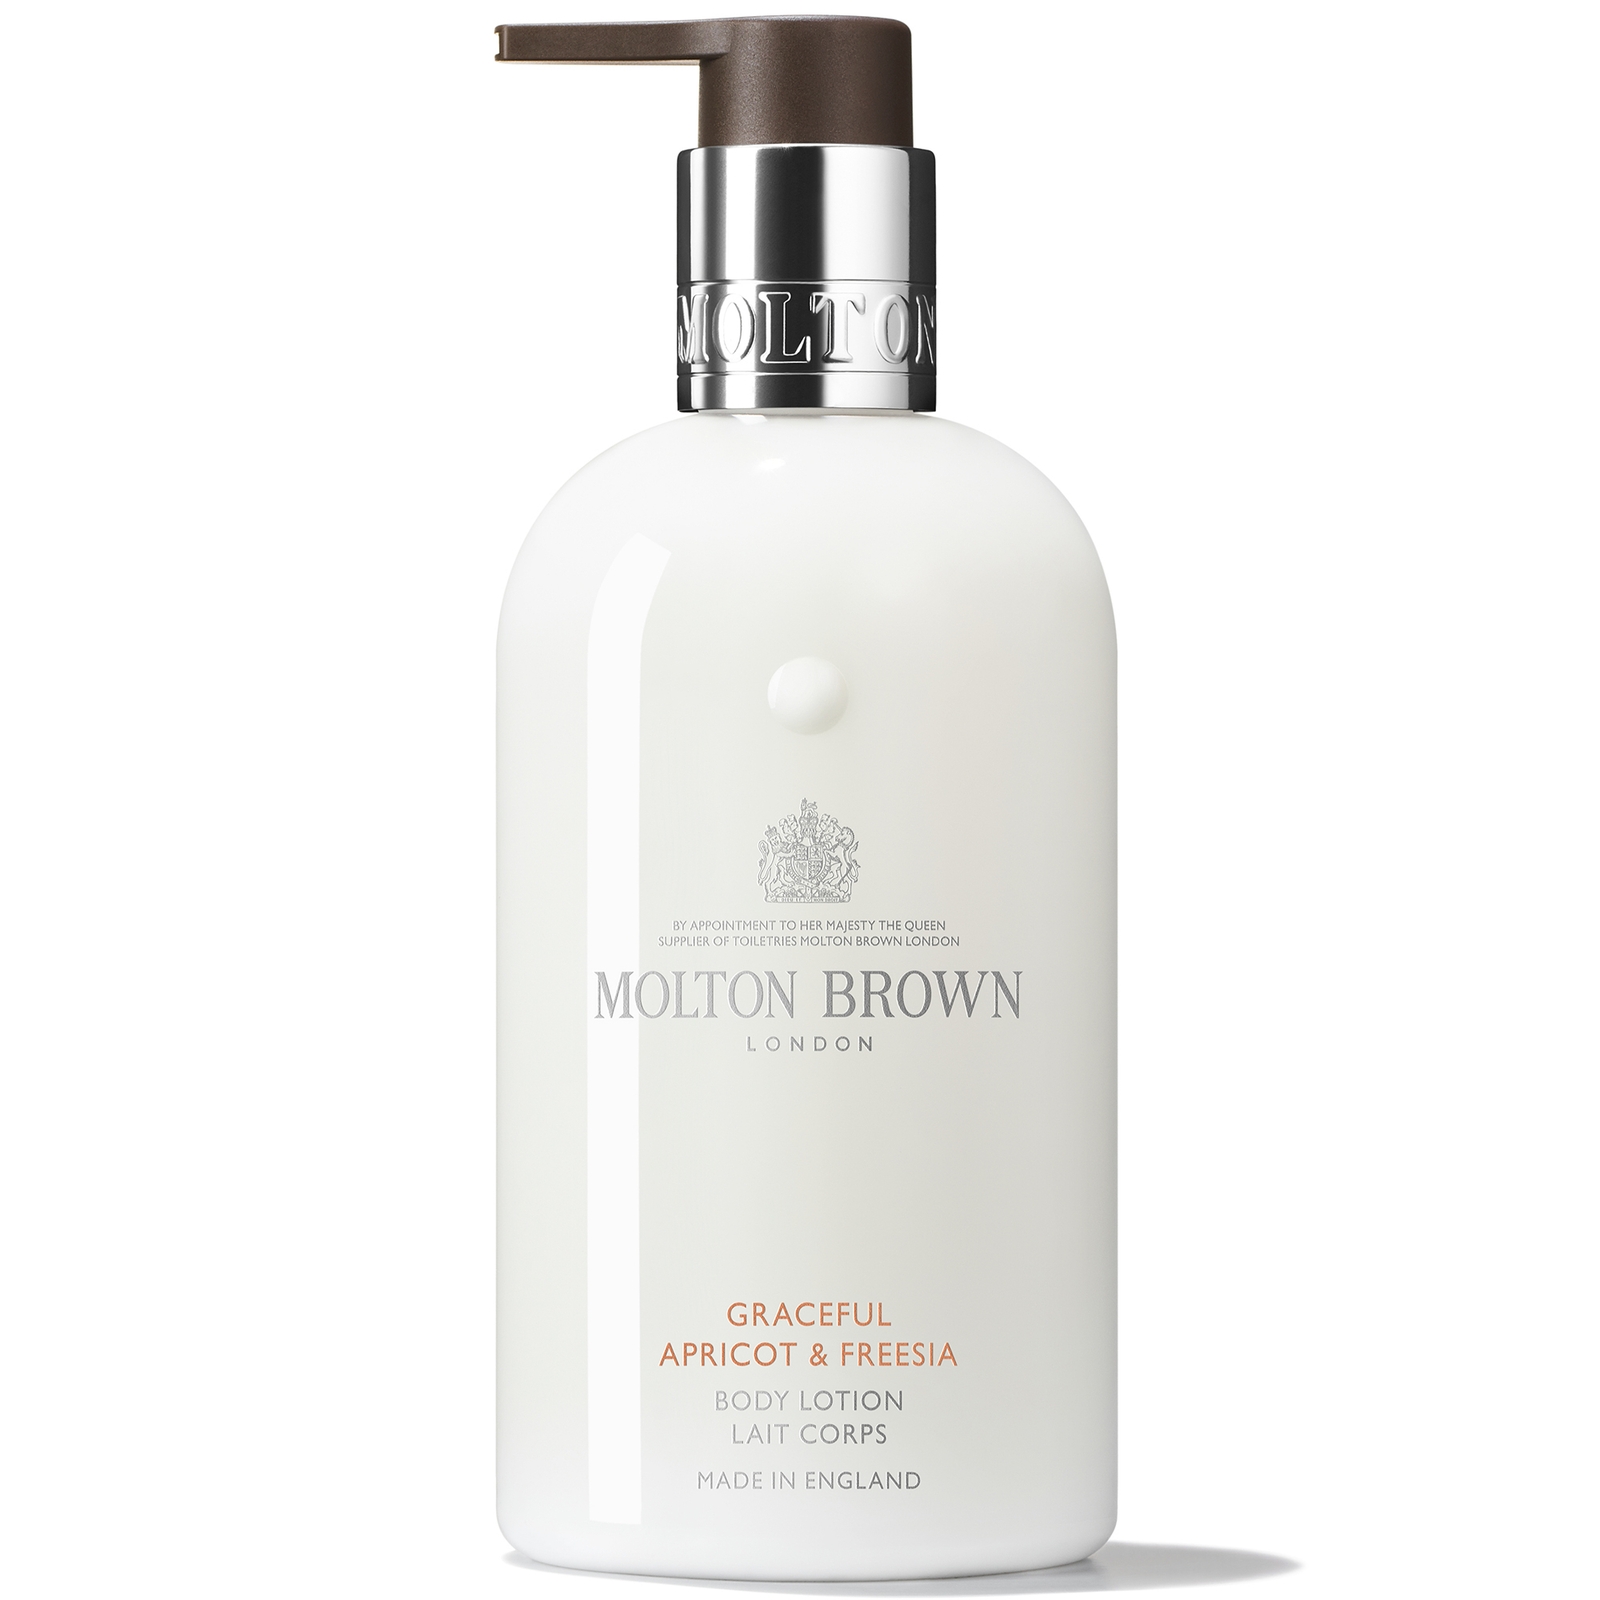 Molton Brown Graceful Apricot and Freesia Body Lotion 300ml